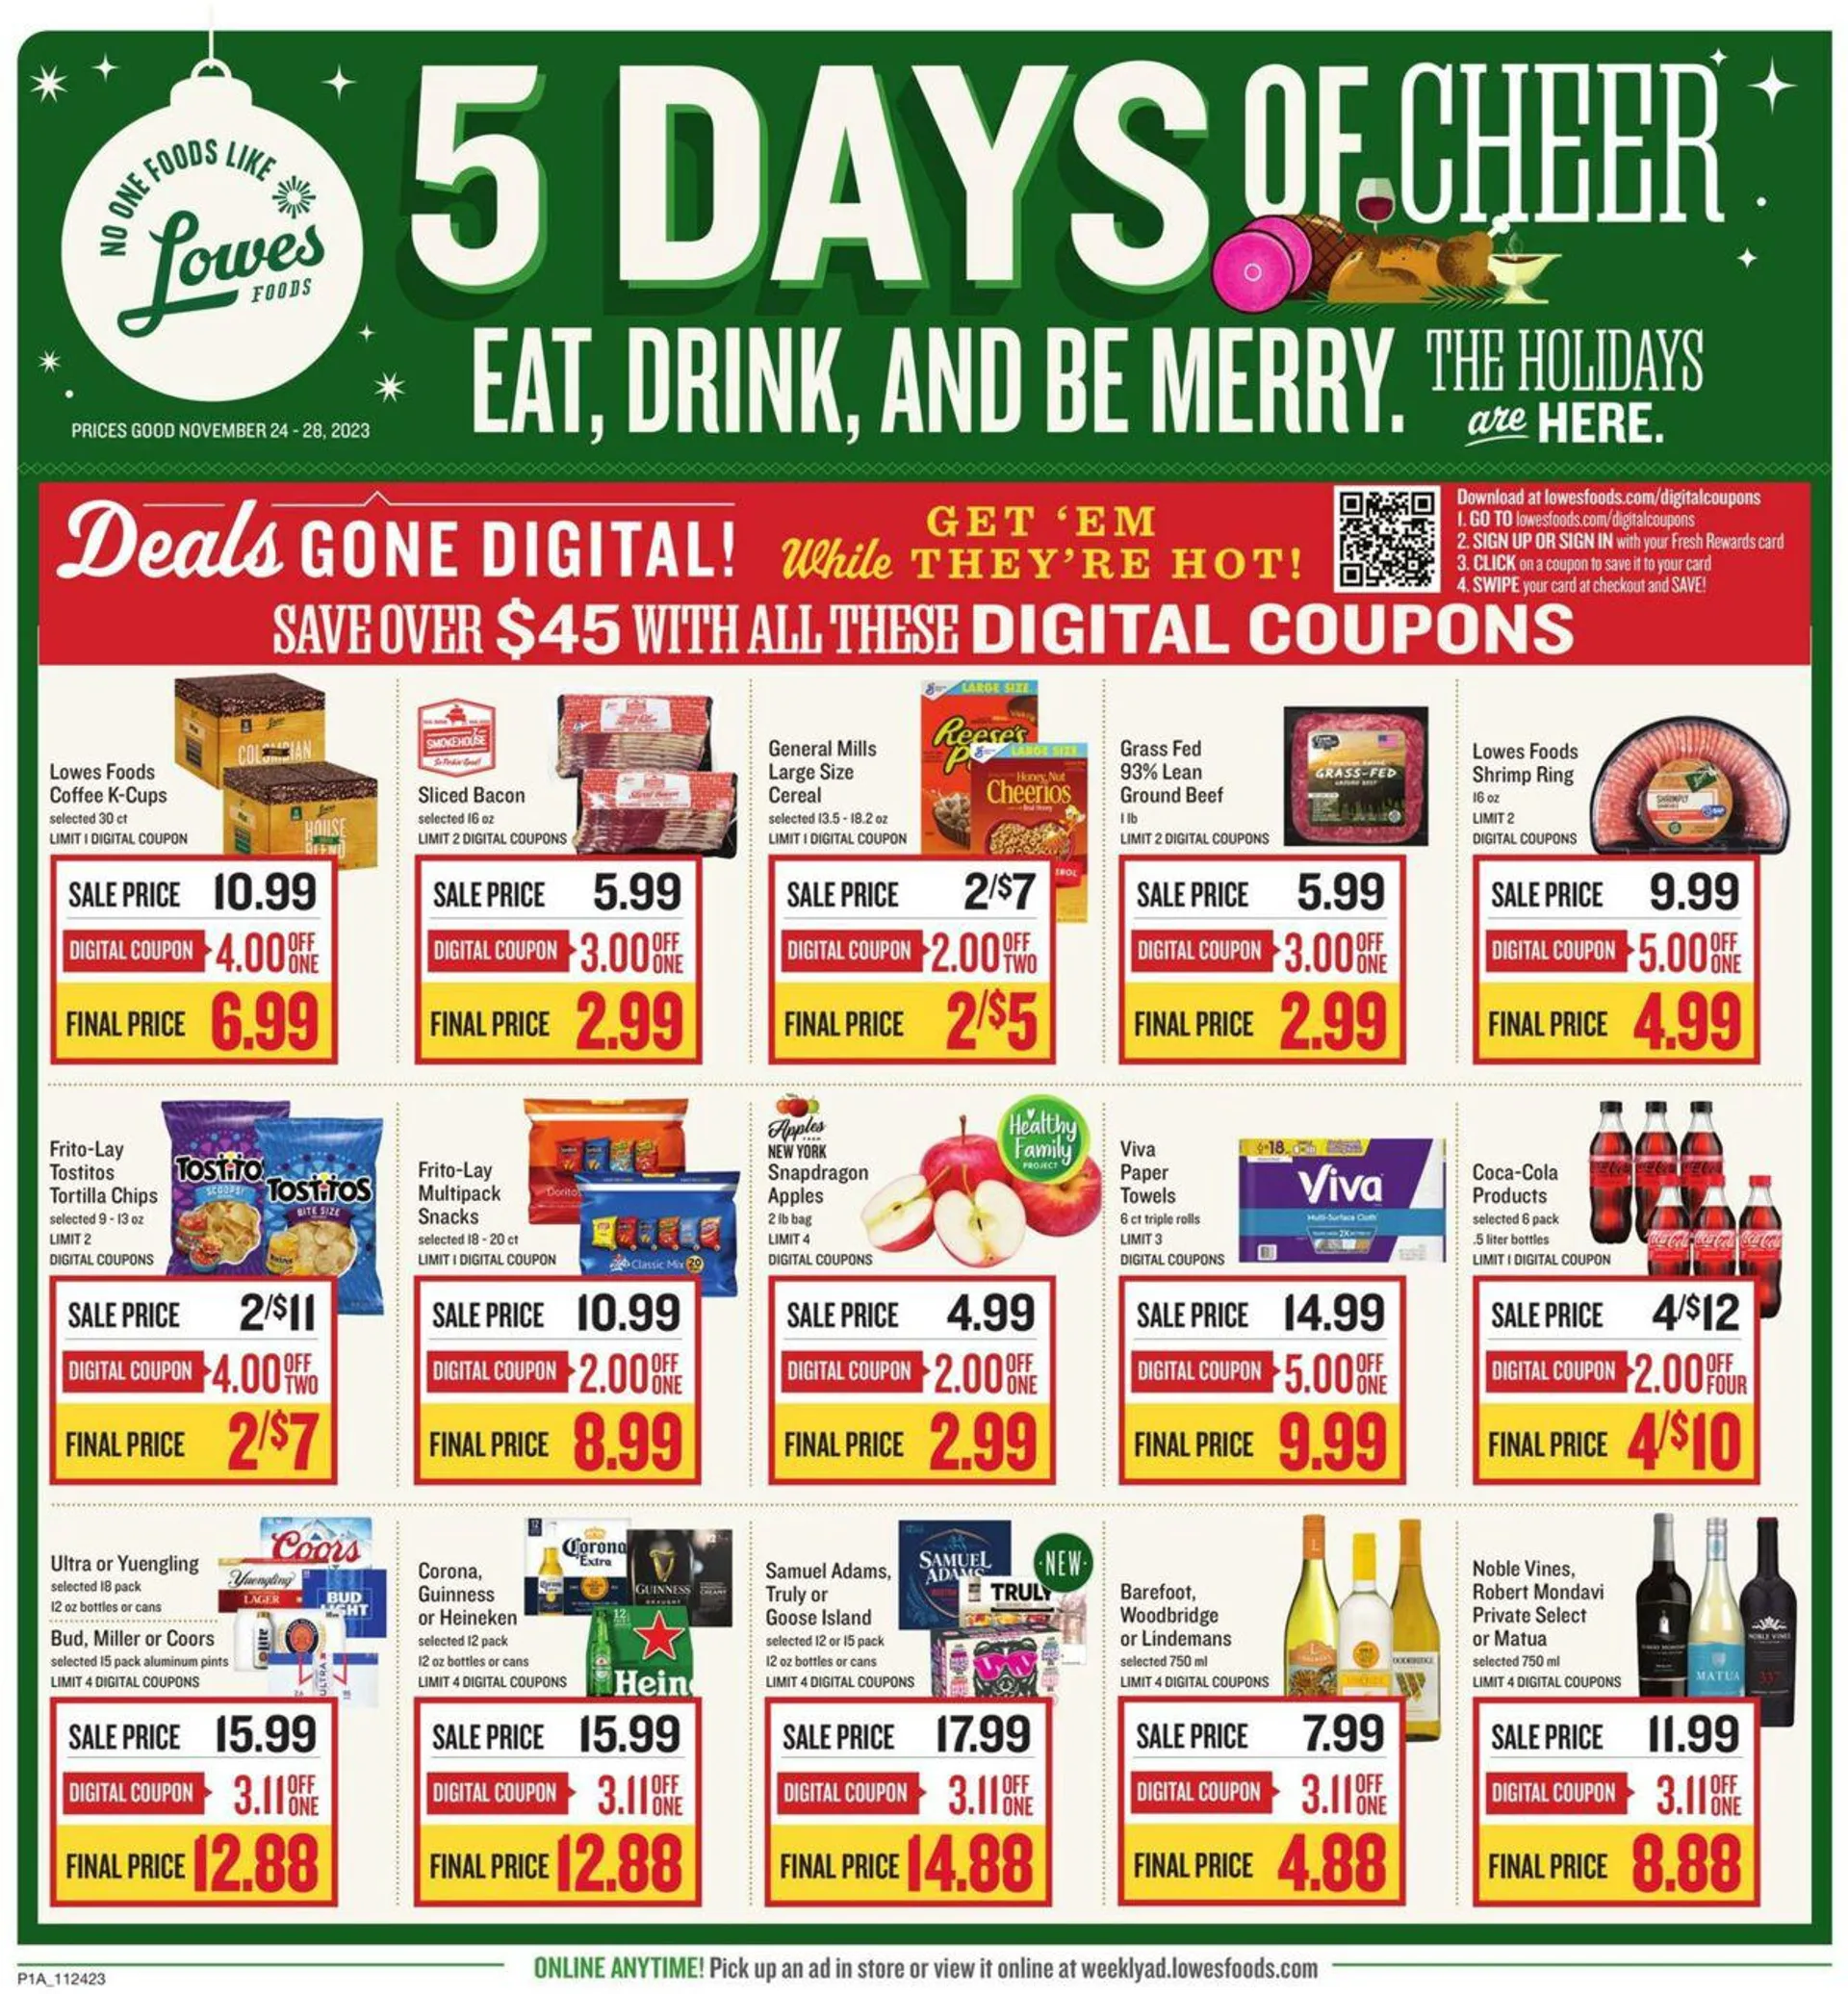 lowes foods weekly specials